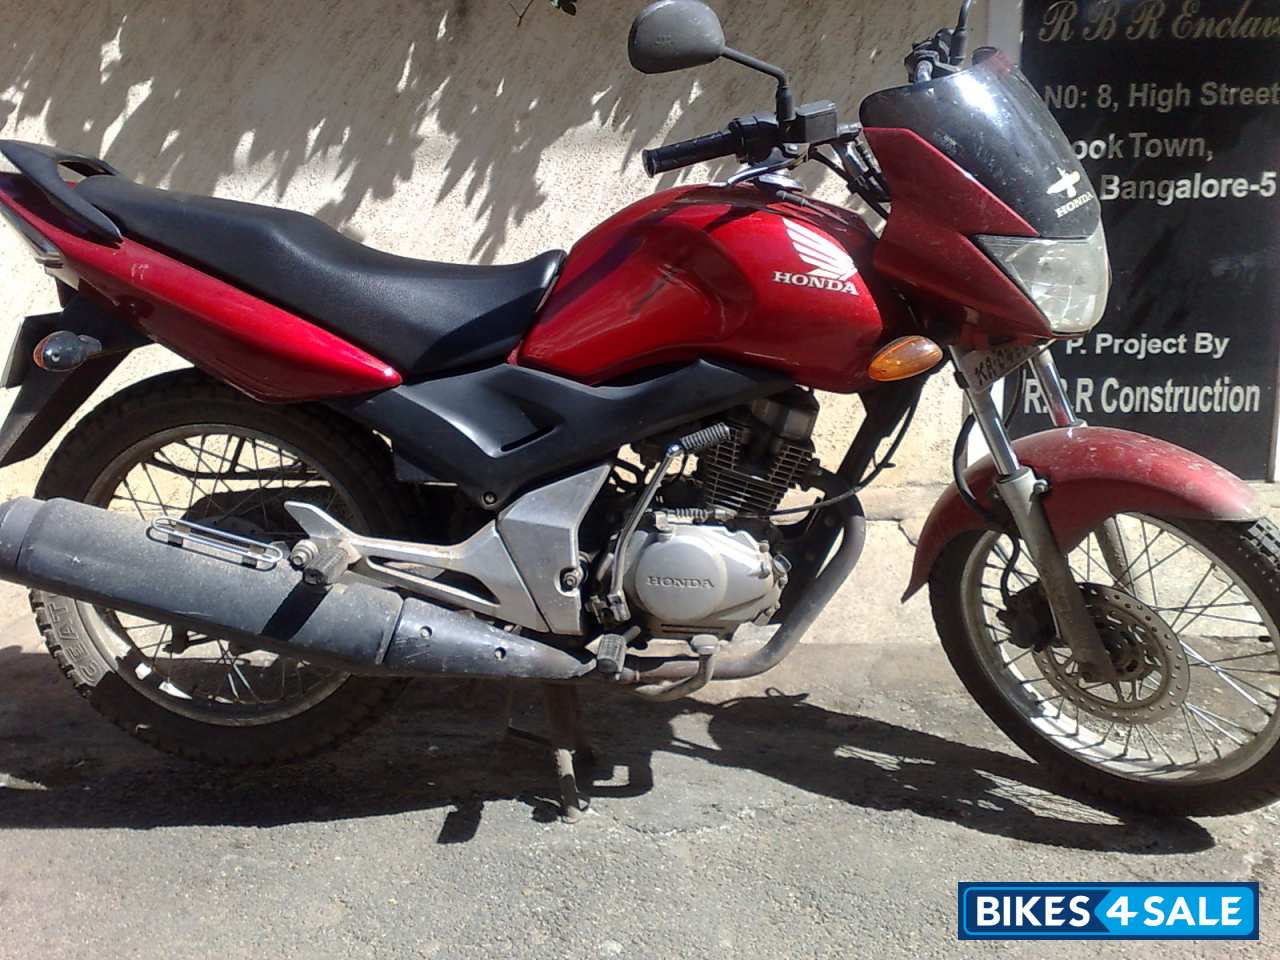 Used 2004 model Honda Unicorn for sale in Bangalore. ID 16215. Red